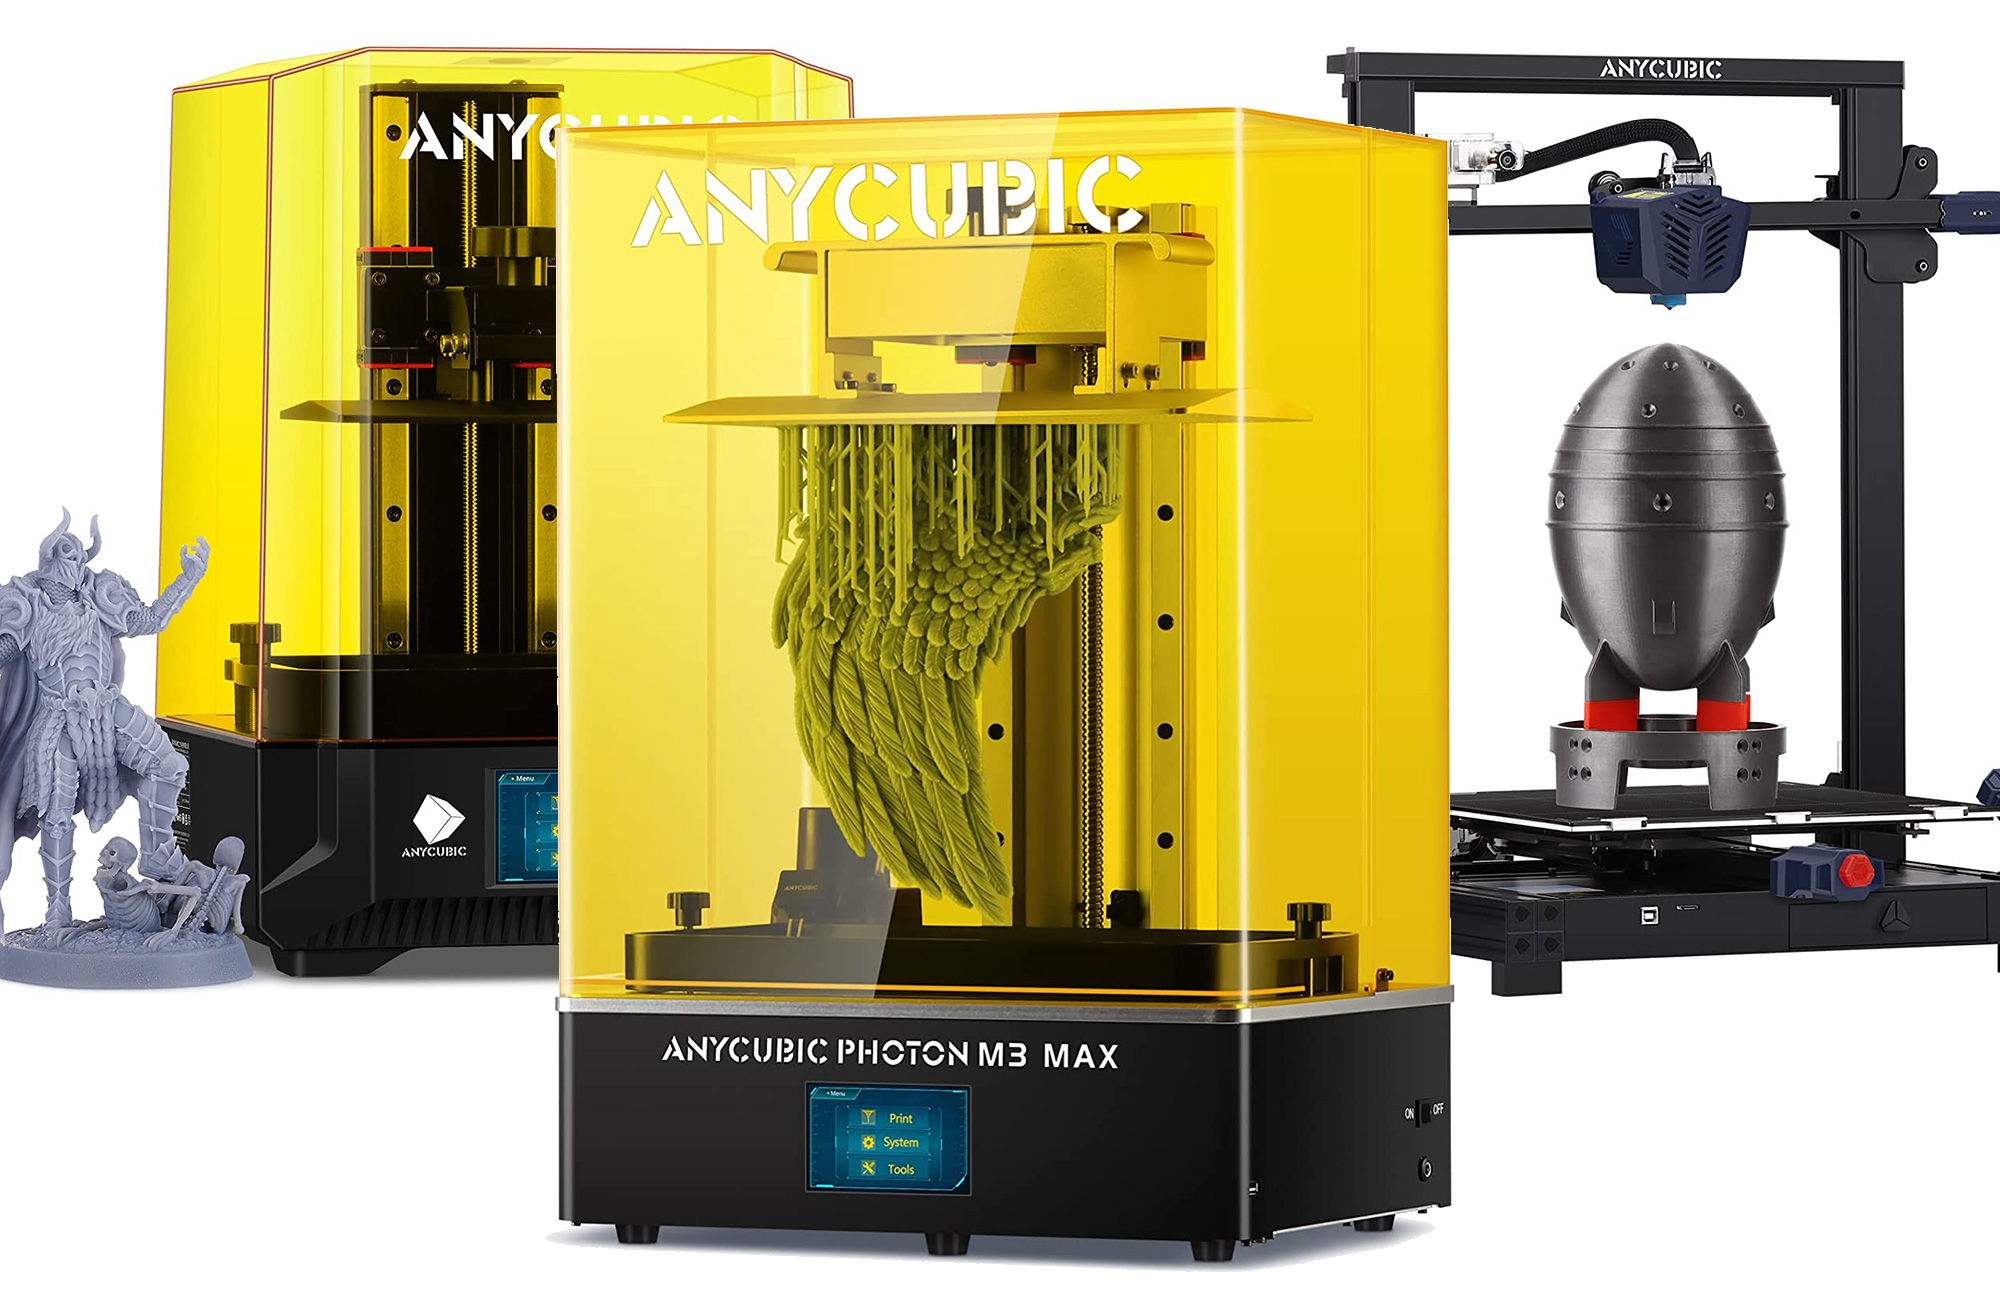 Get up to 50% off ANYCUBIC 3D printers at Amazon right now